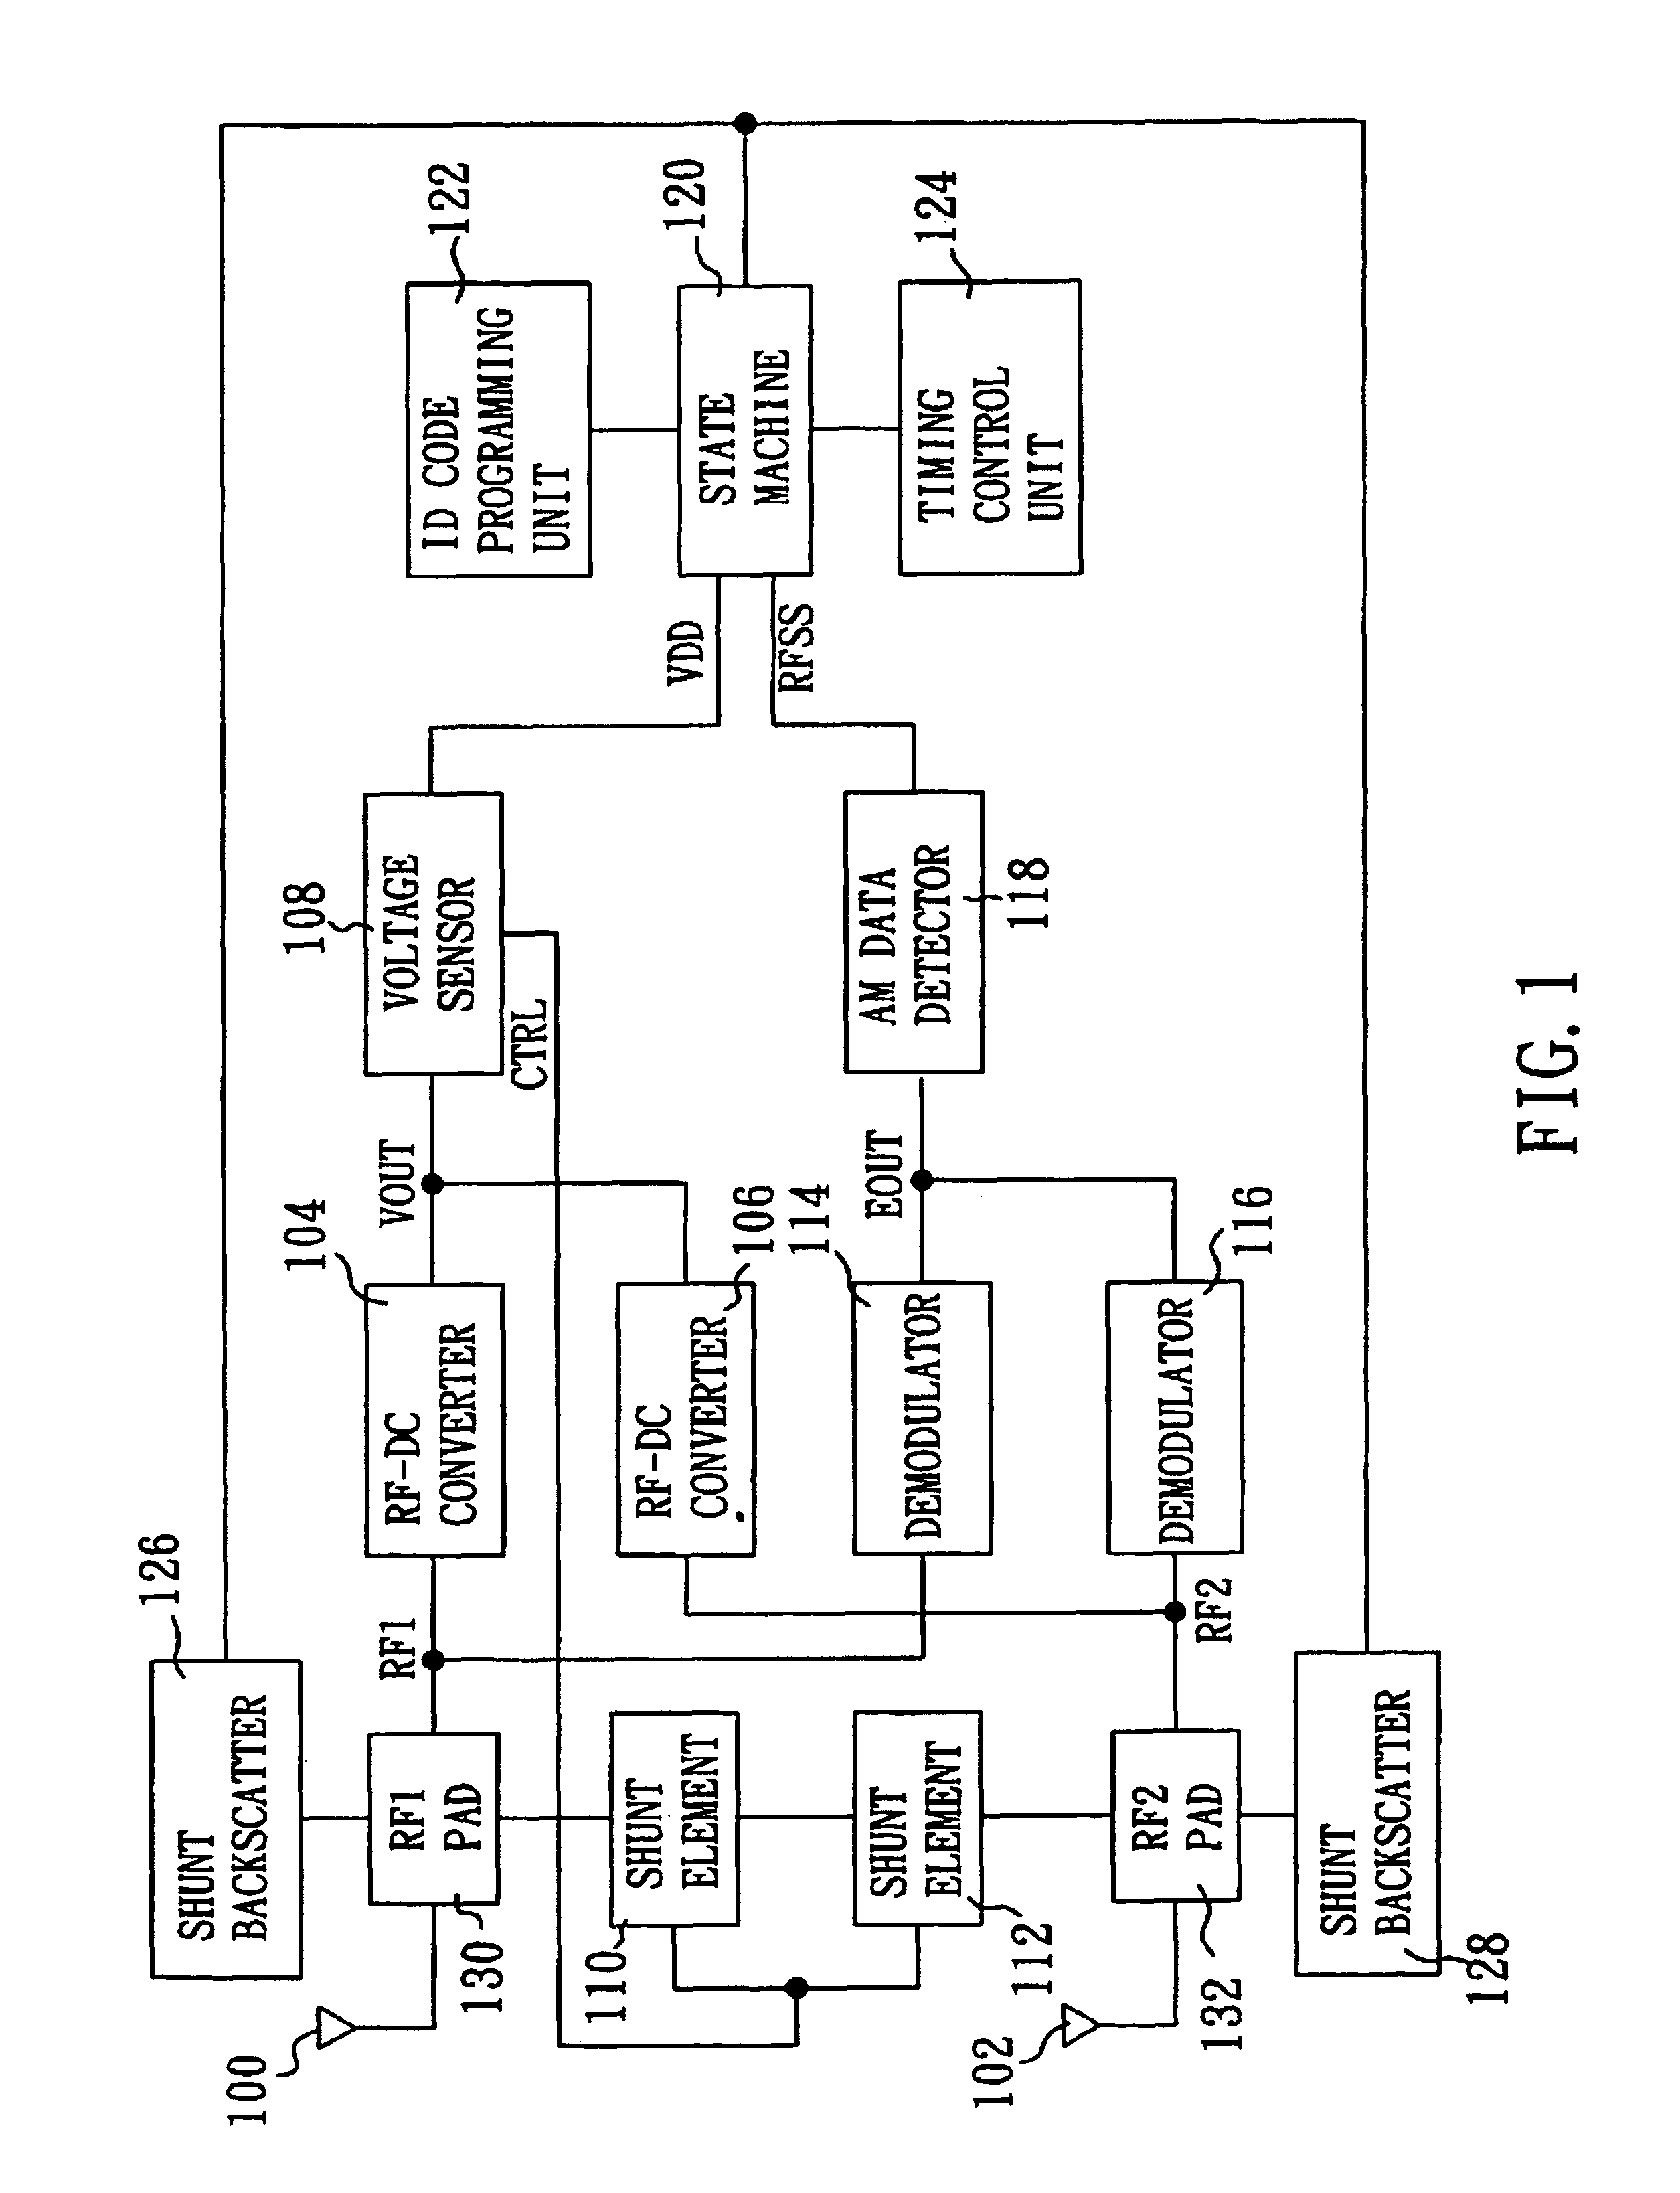 Radio frequency data communication device in CMOS process